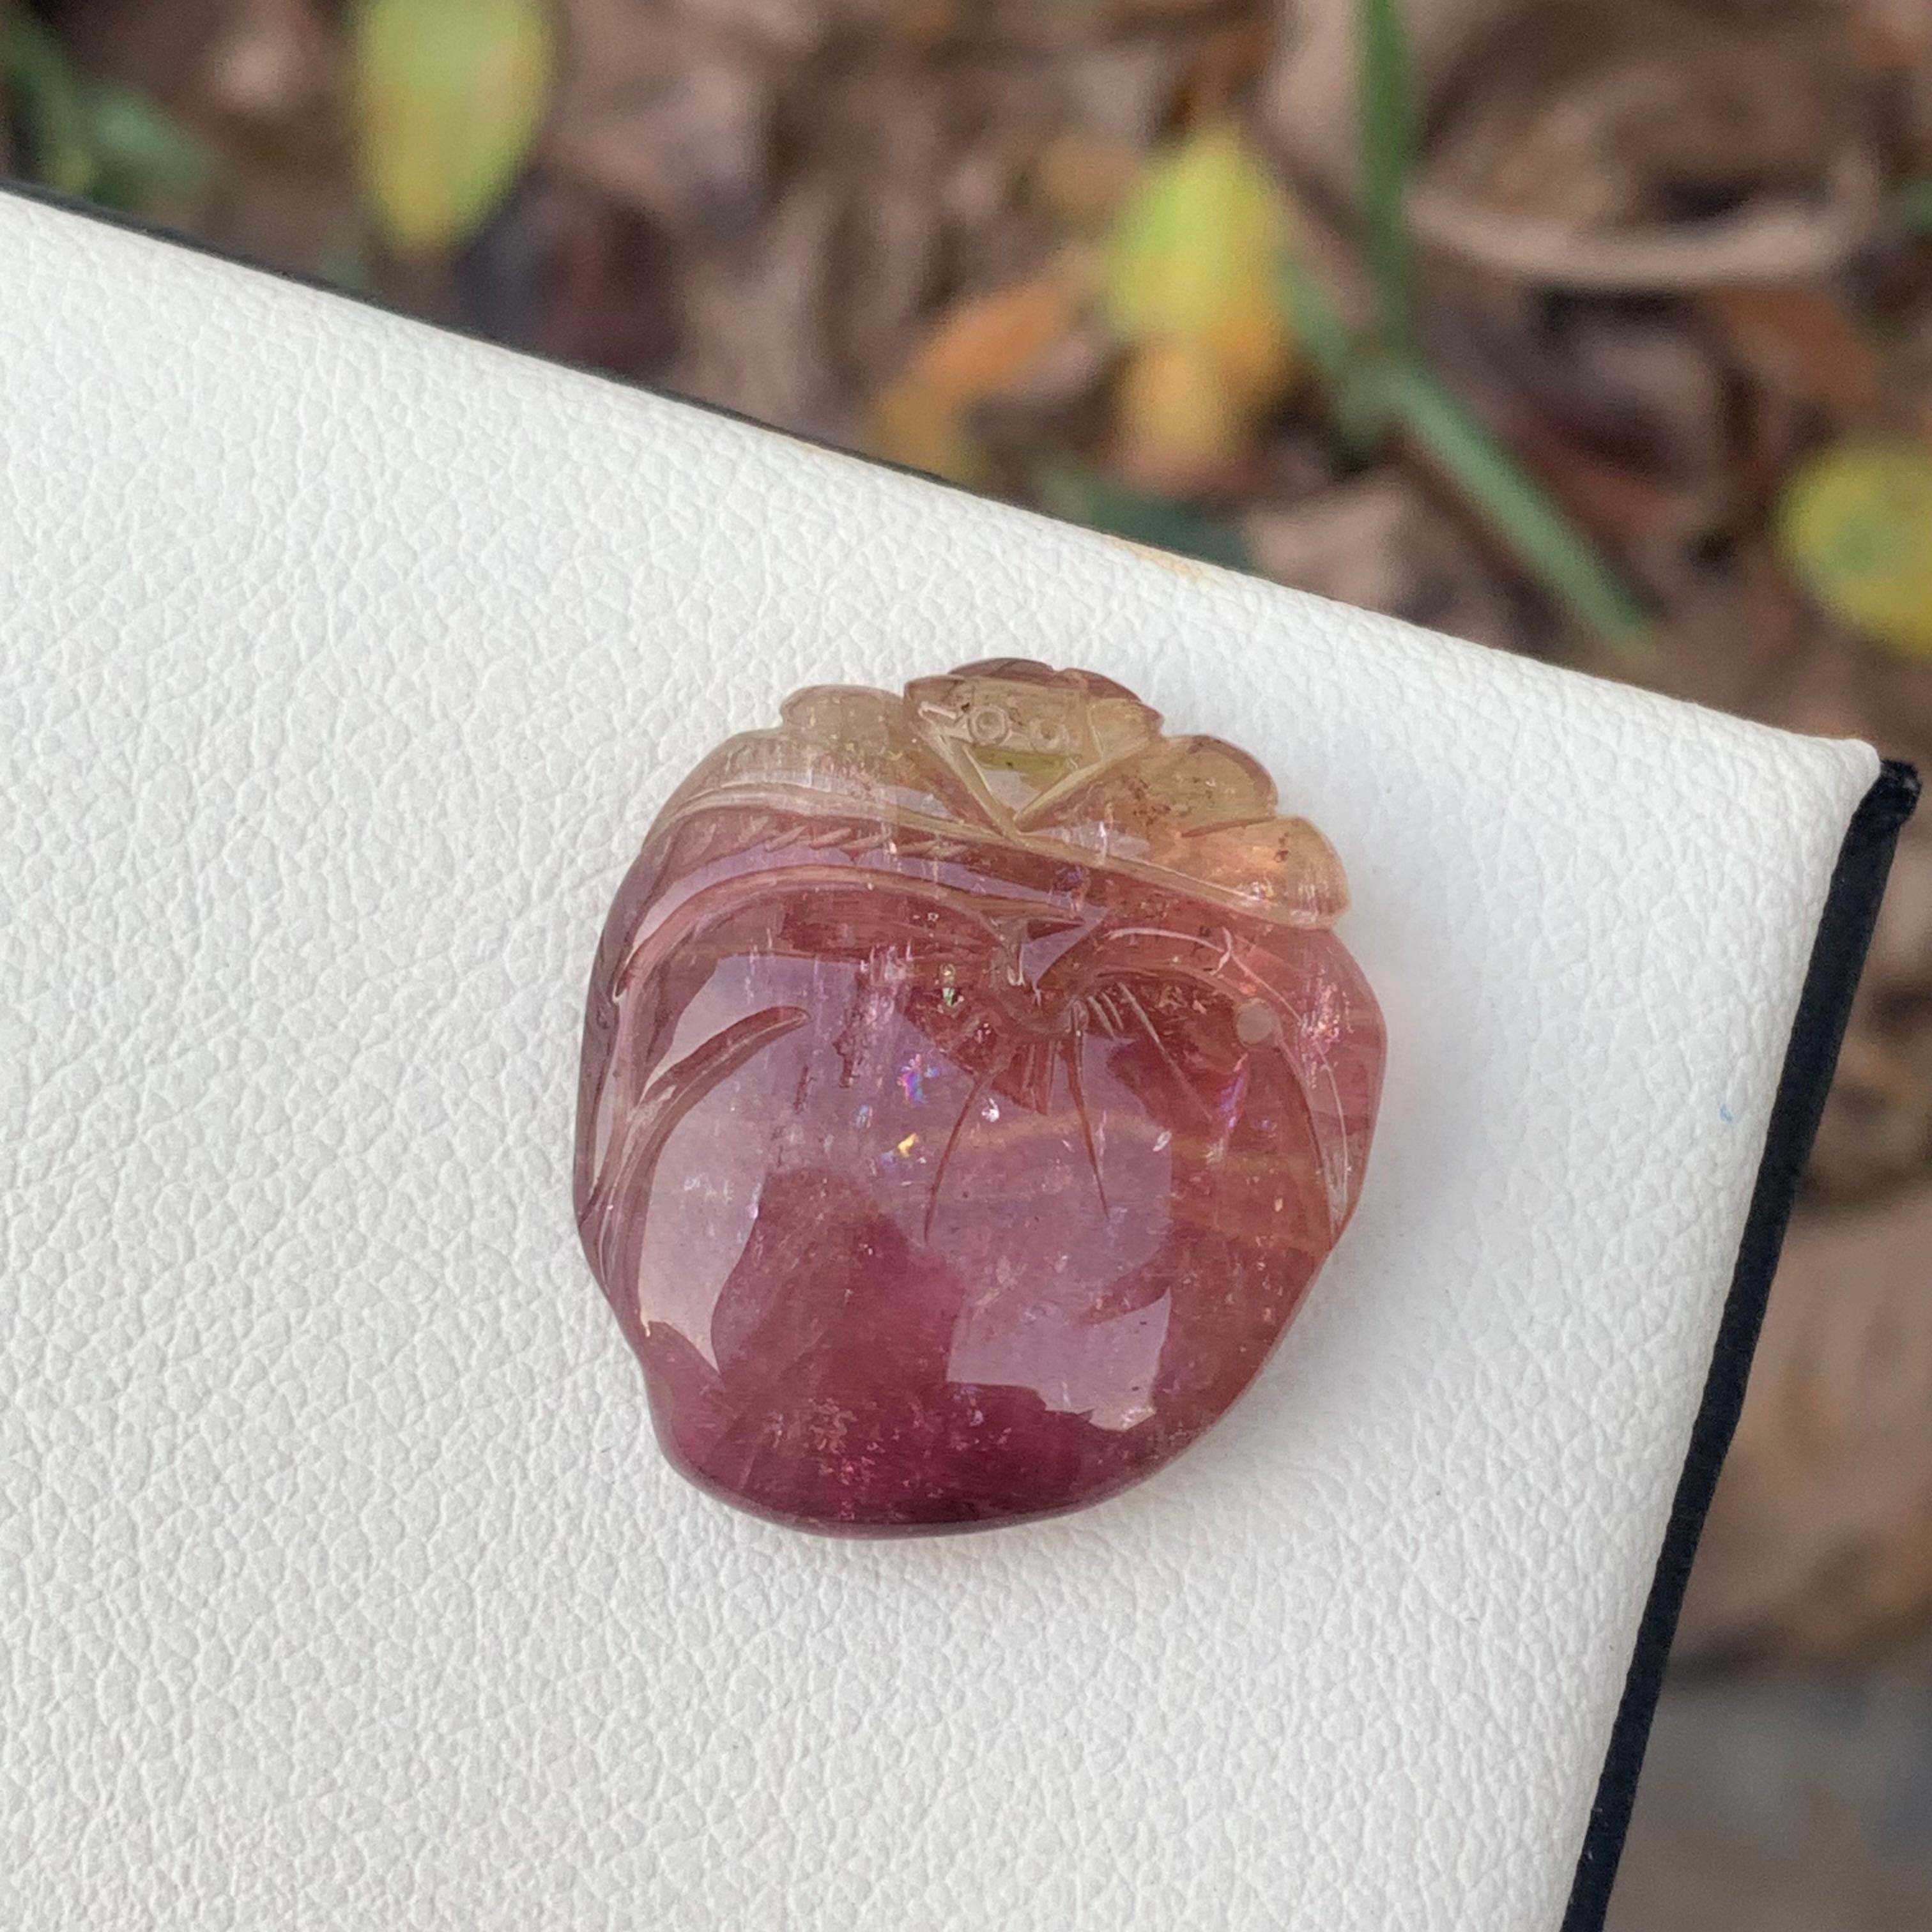 Incredible Loose Bi-Color Tourmaline Drilled Craving From Africa 
WEIGHT: 31.00 Carat
DIMENSIONS: 2.5 x 2.2 x 0.6 Cm
ORIGIN: Madagascar, Africa
Color : Pink and Green 
TREATMENT : None

Tourmaline is an extremely popular gemstone; the name